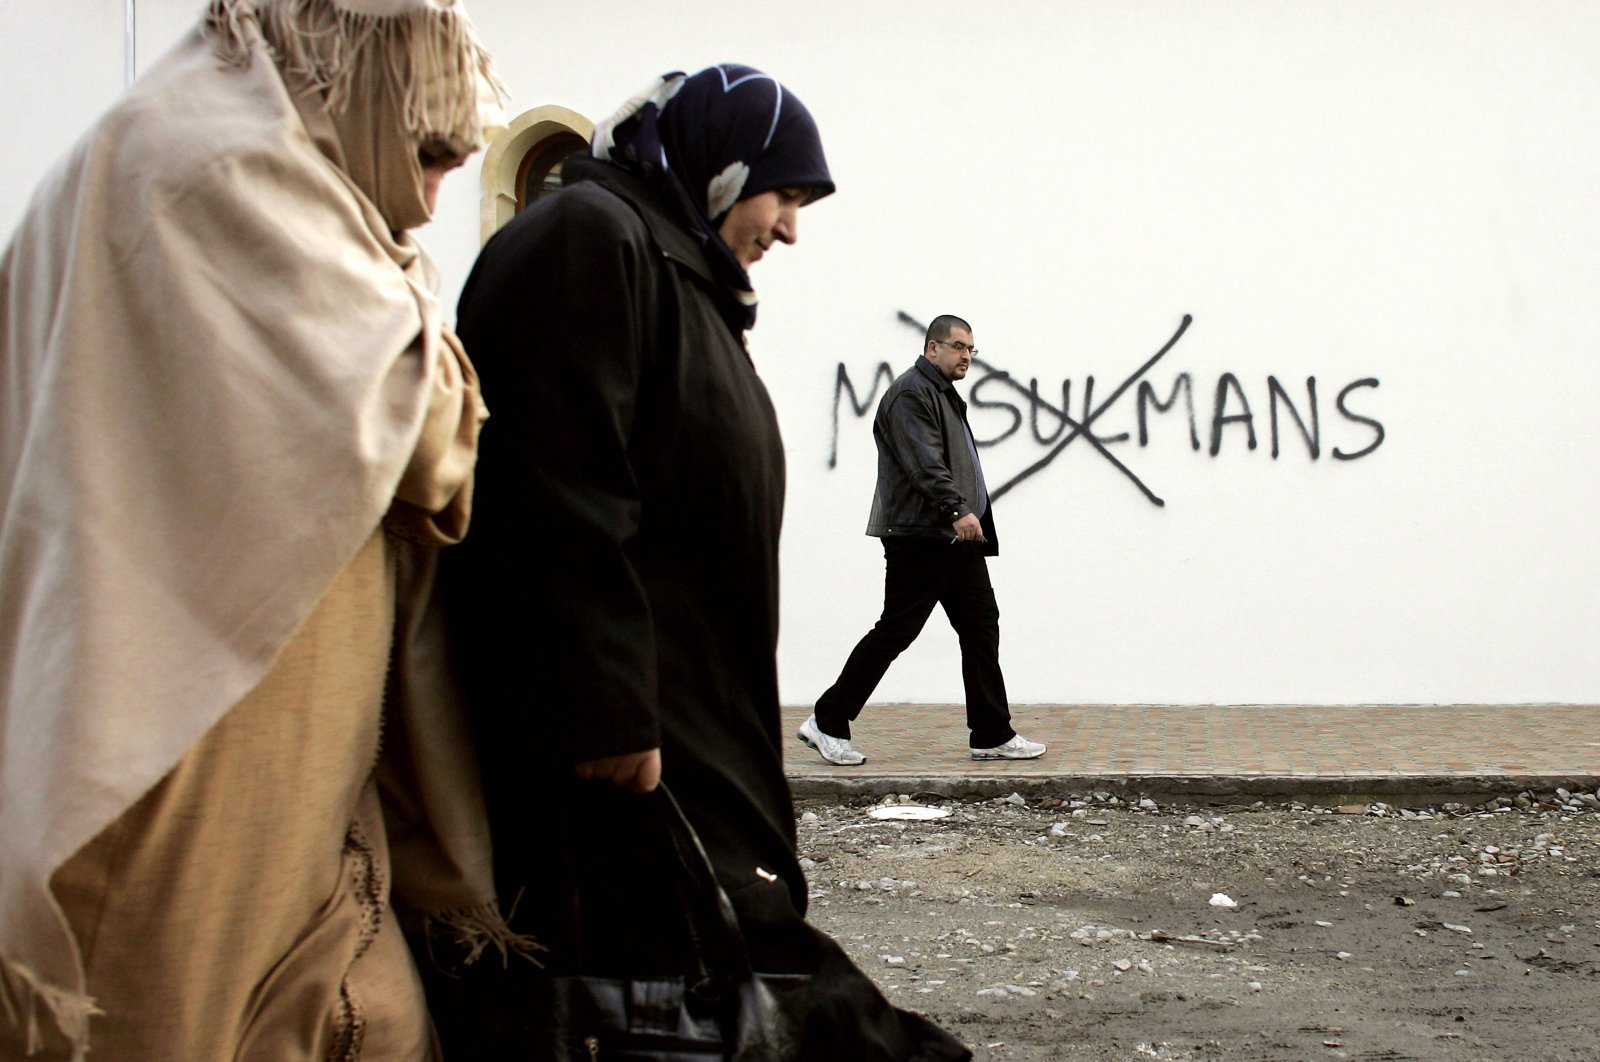 Muslim residents walk past racial slurs painted on the walls of a mosque in the town of Saint-Etienne, central France, Feb. 8, 2010. (AP Photo)